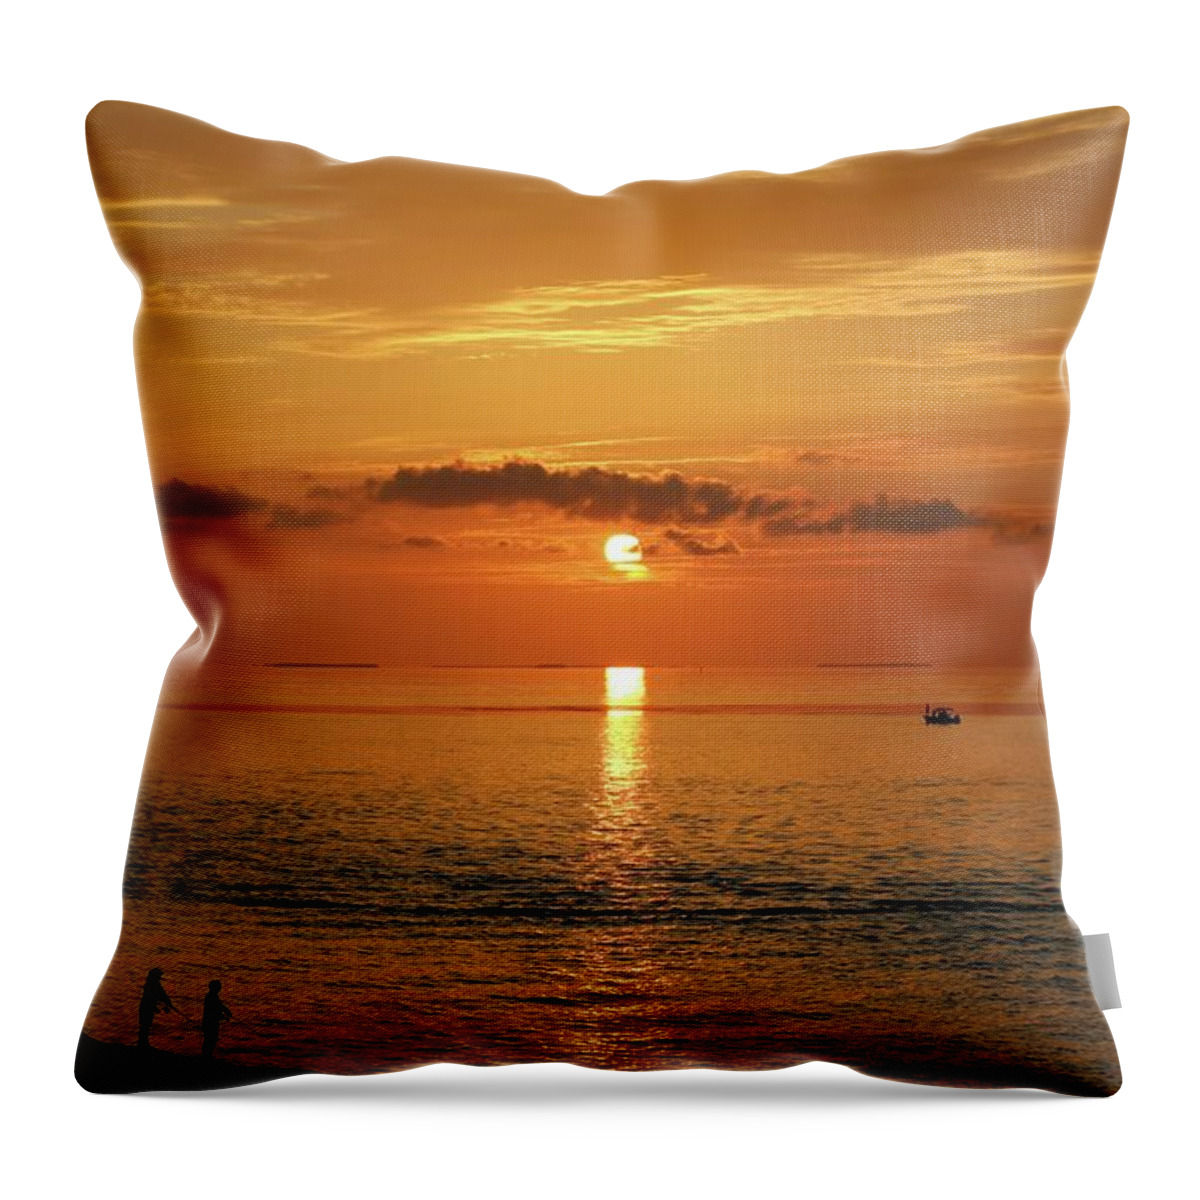 Orange Throw Pillow featuring the photograph Orange Sunset by Claire Duda